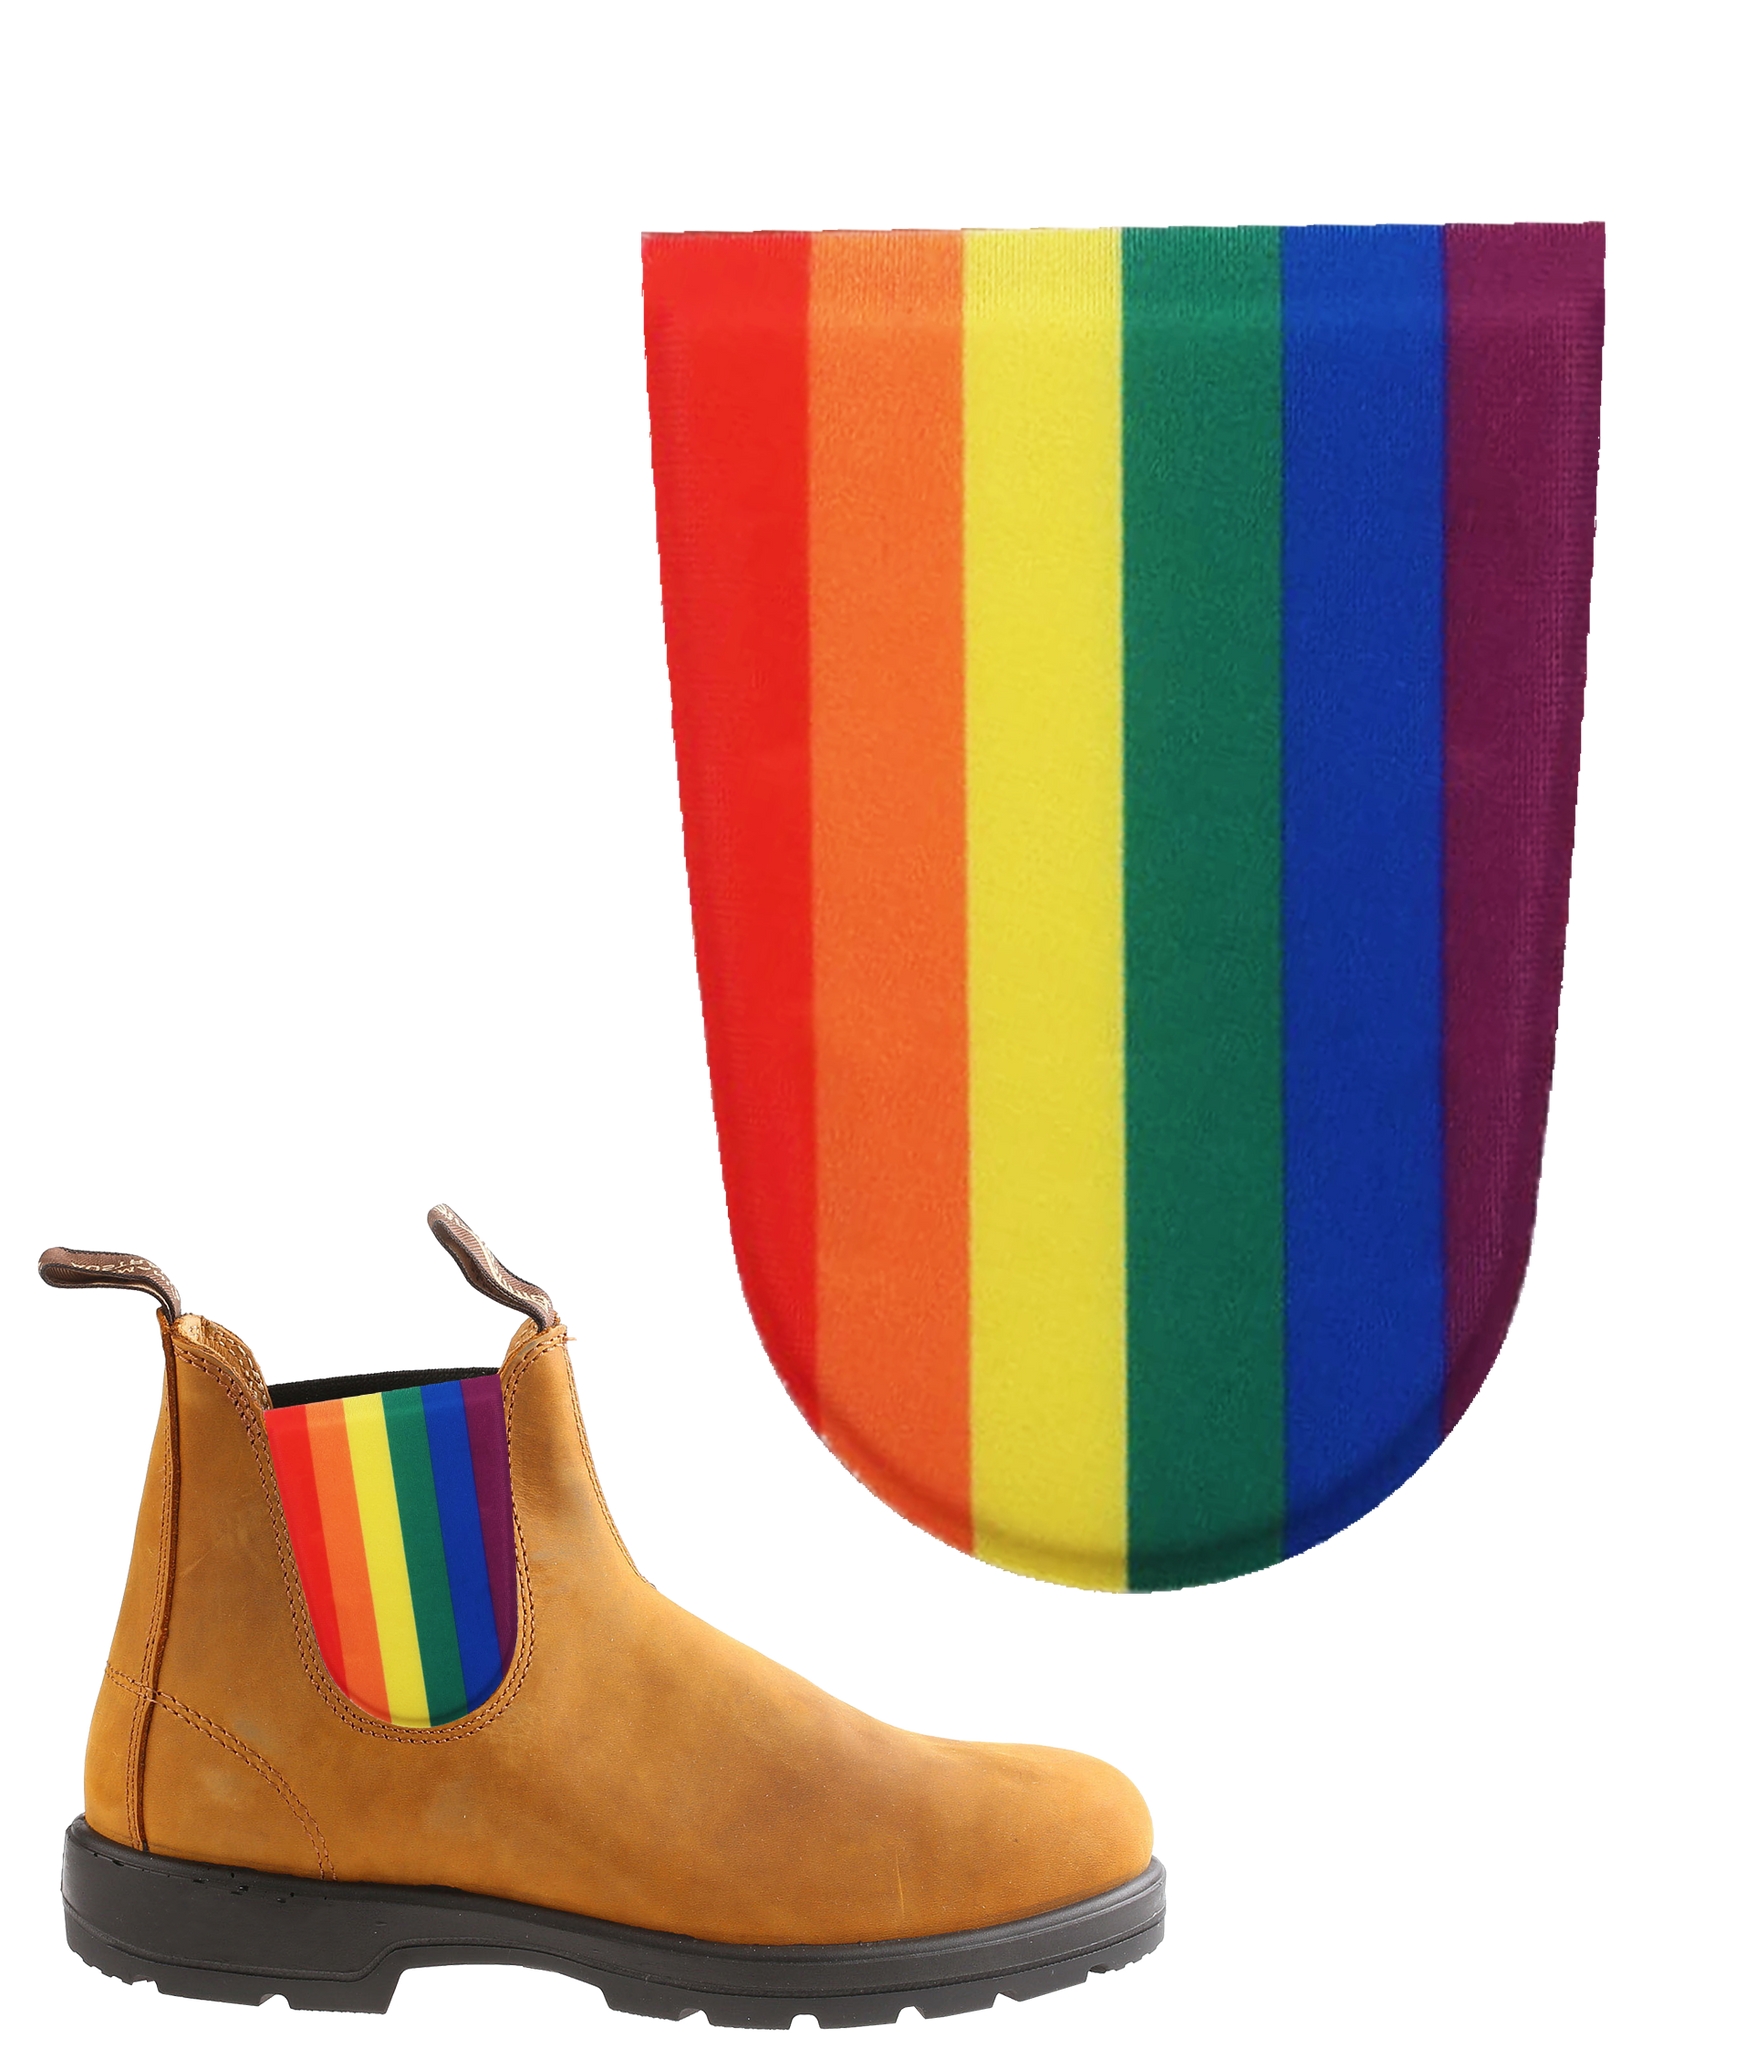 Clip-On Accessories for boots - Pride 